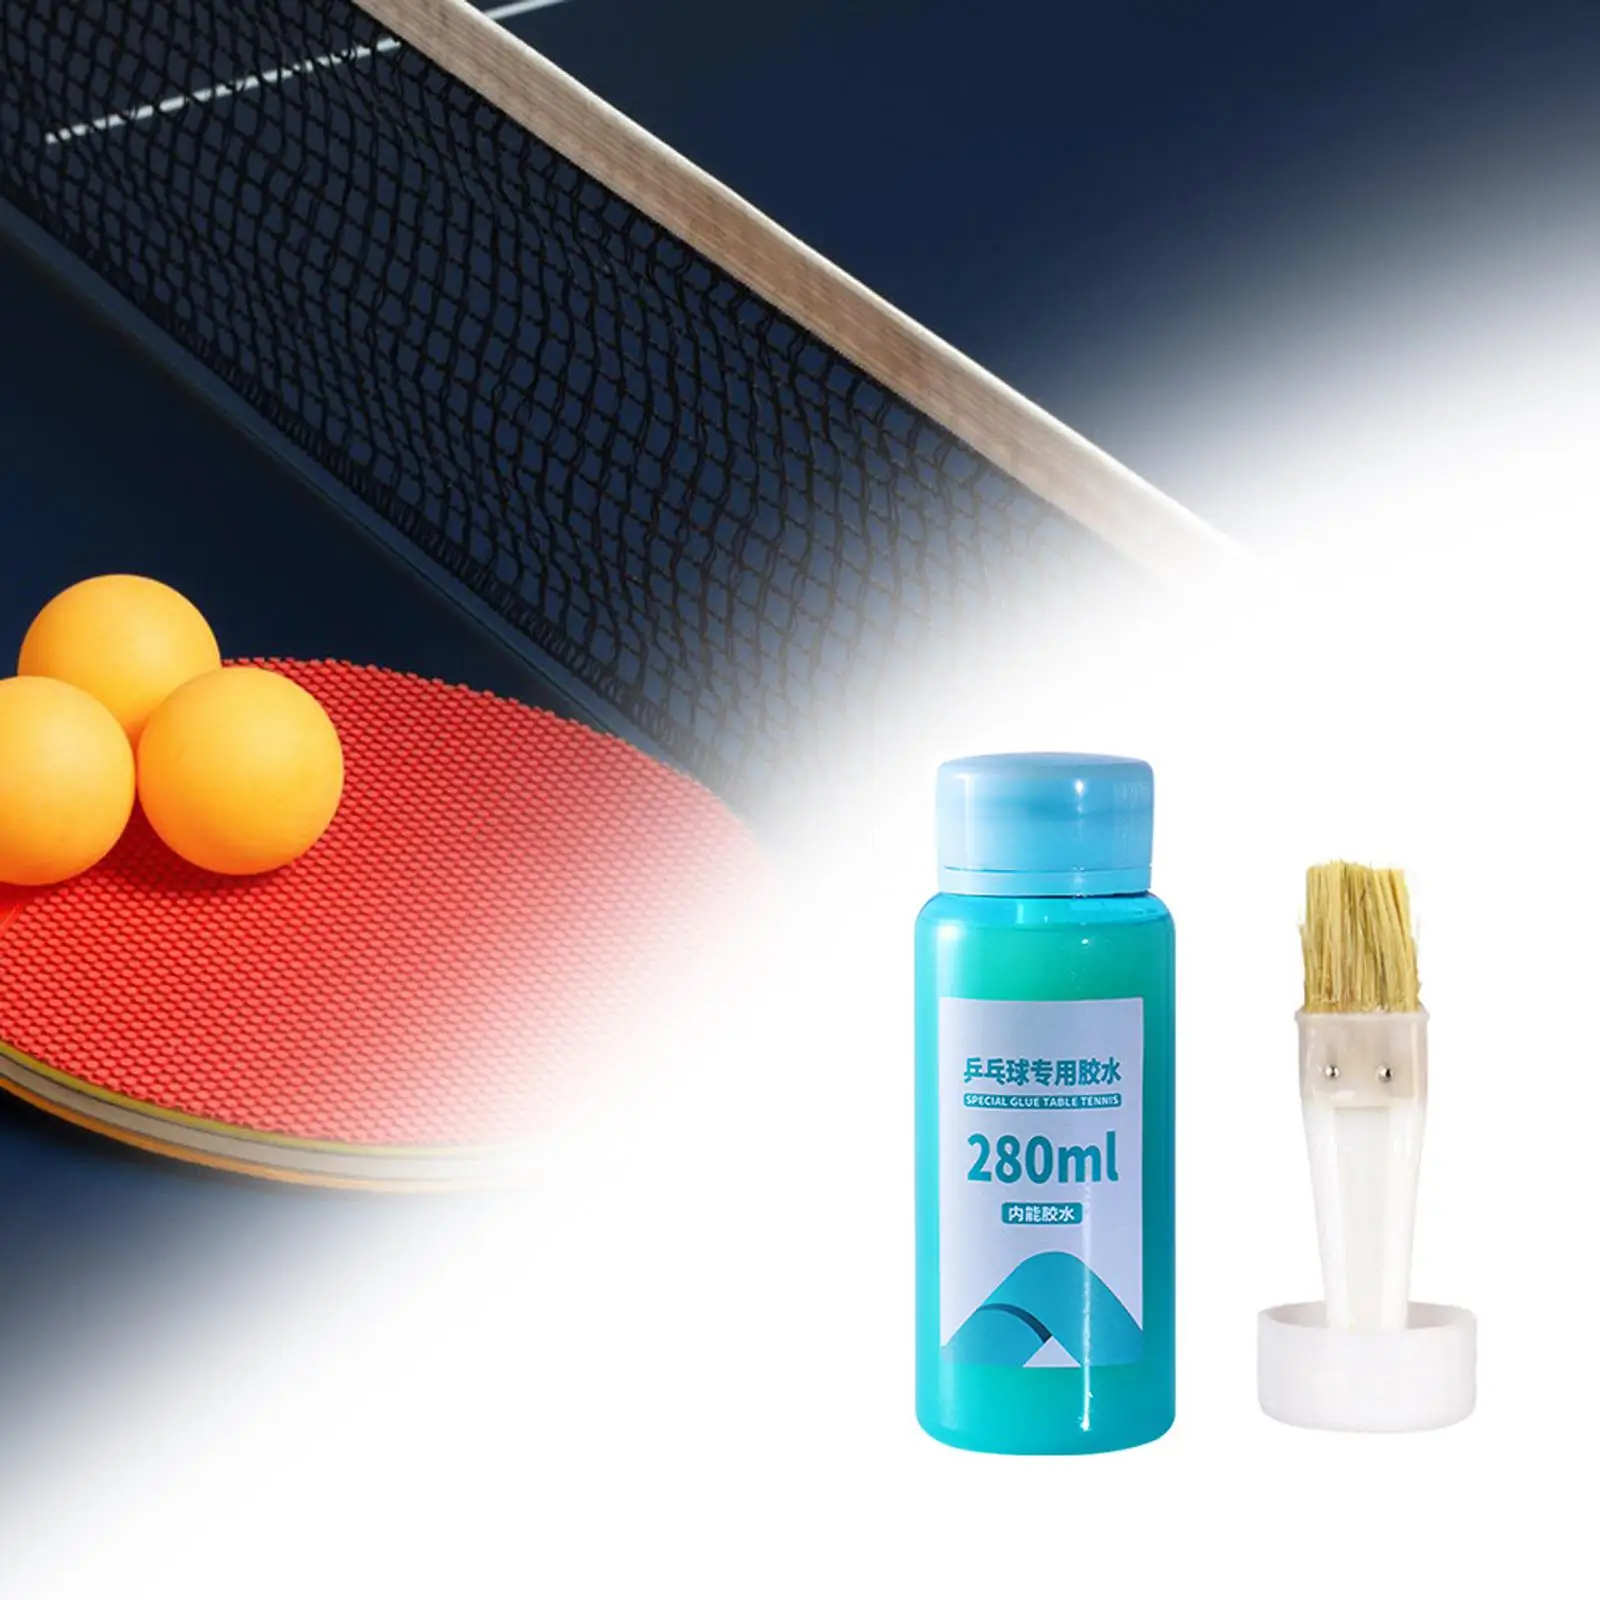 Table Tennis Paddle Glue Easy to Apply for Assembling Table Tennis Paddle